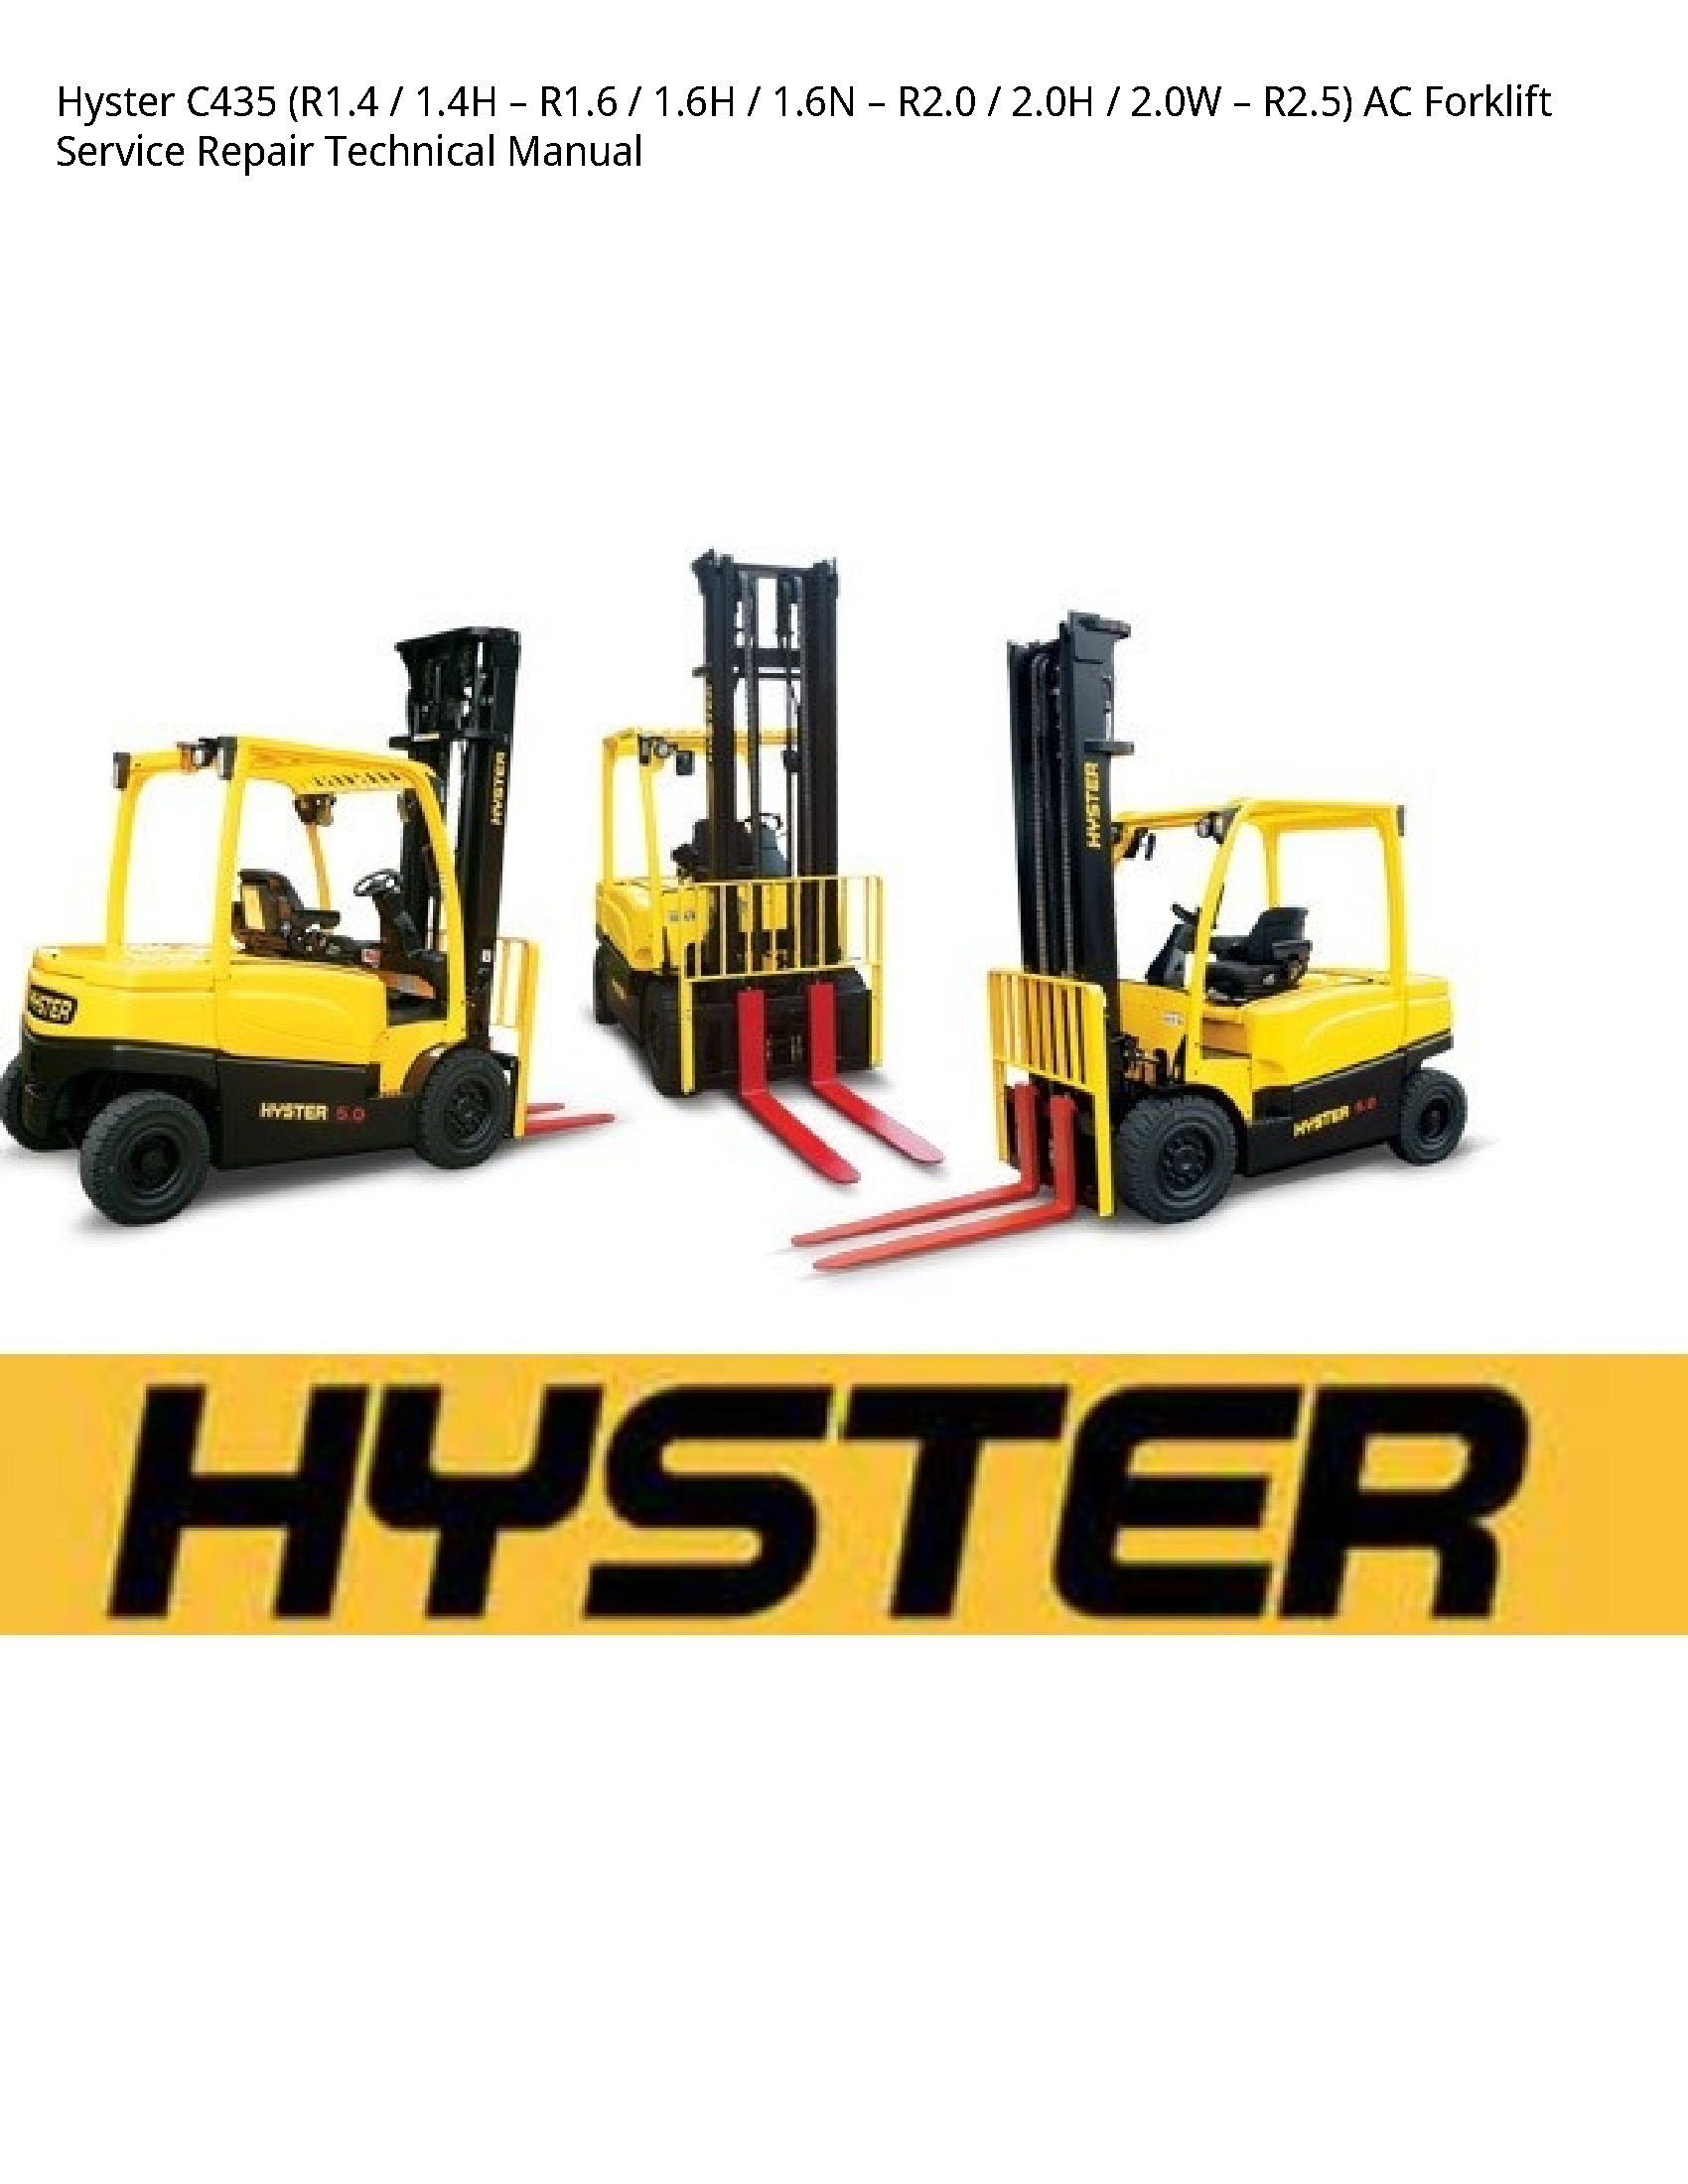 Hyster C435 AC Forklift manual